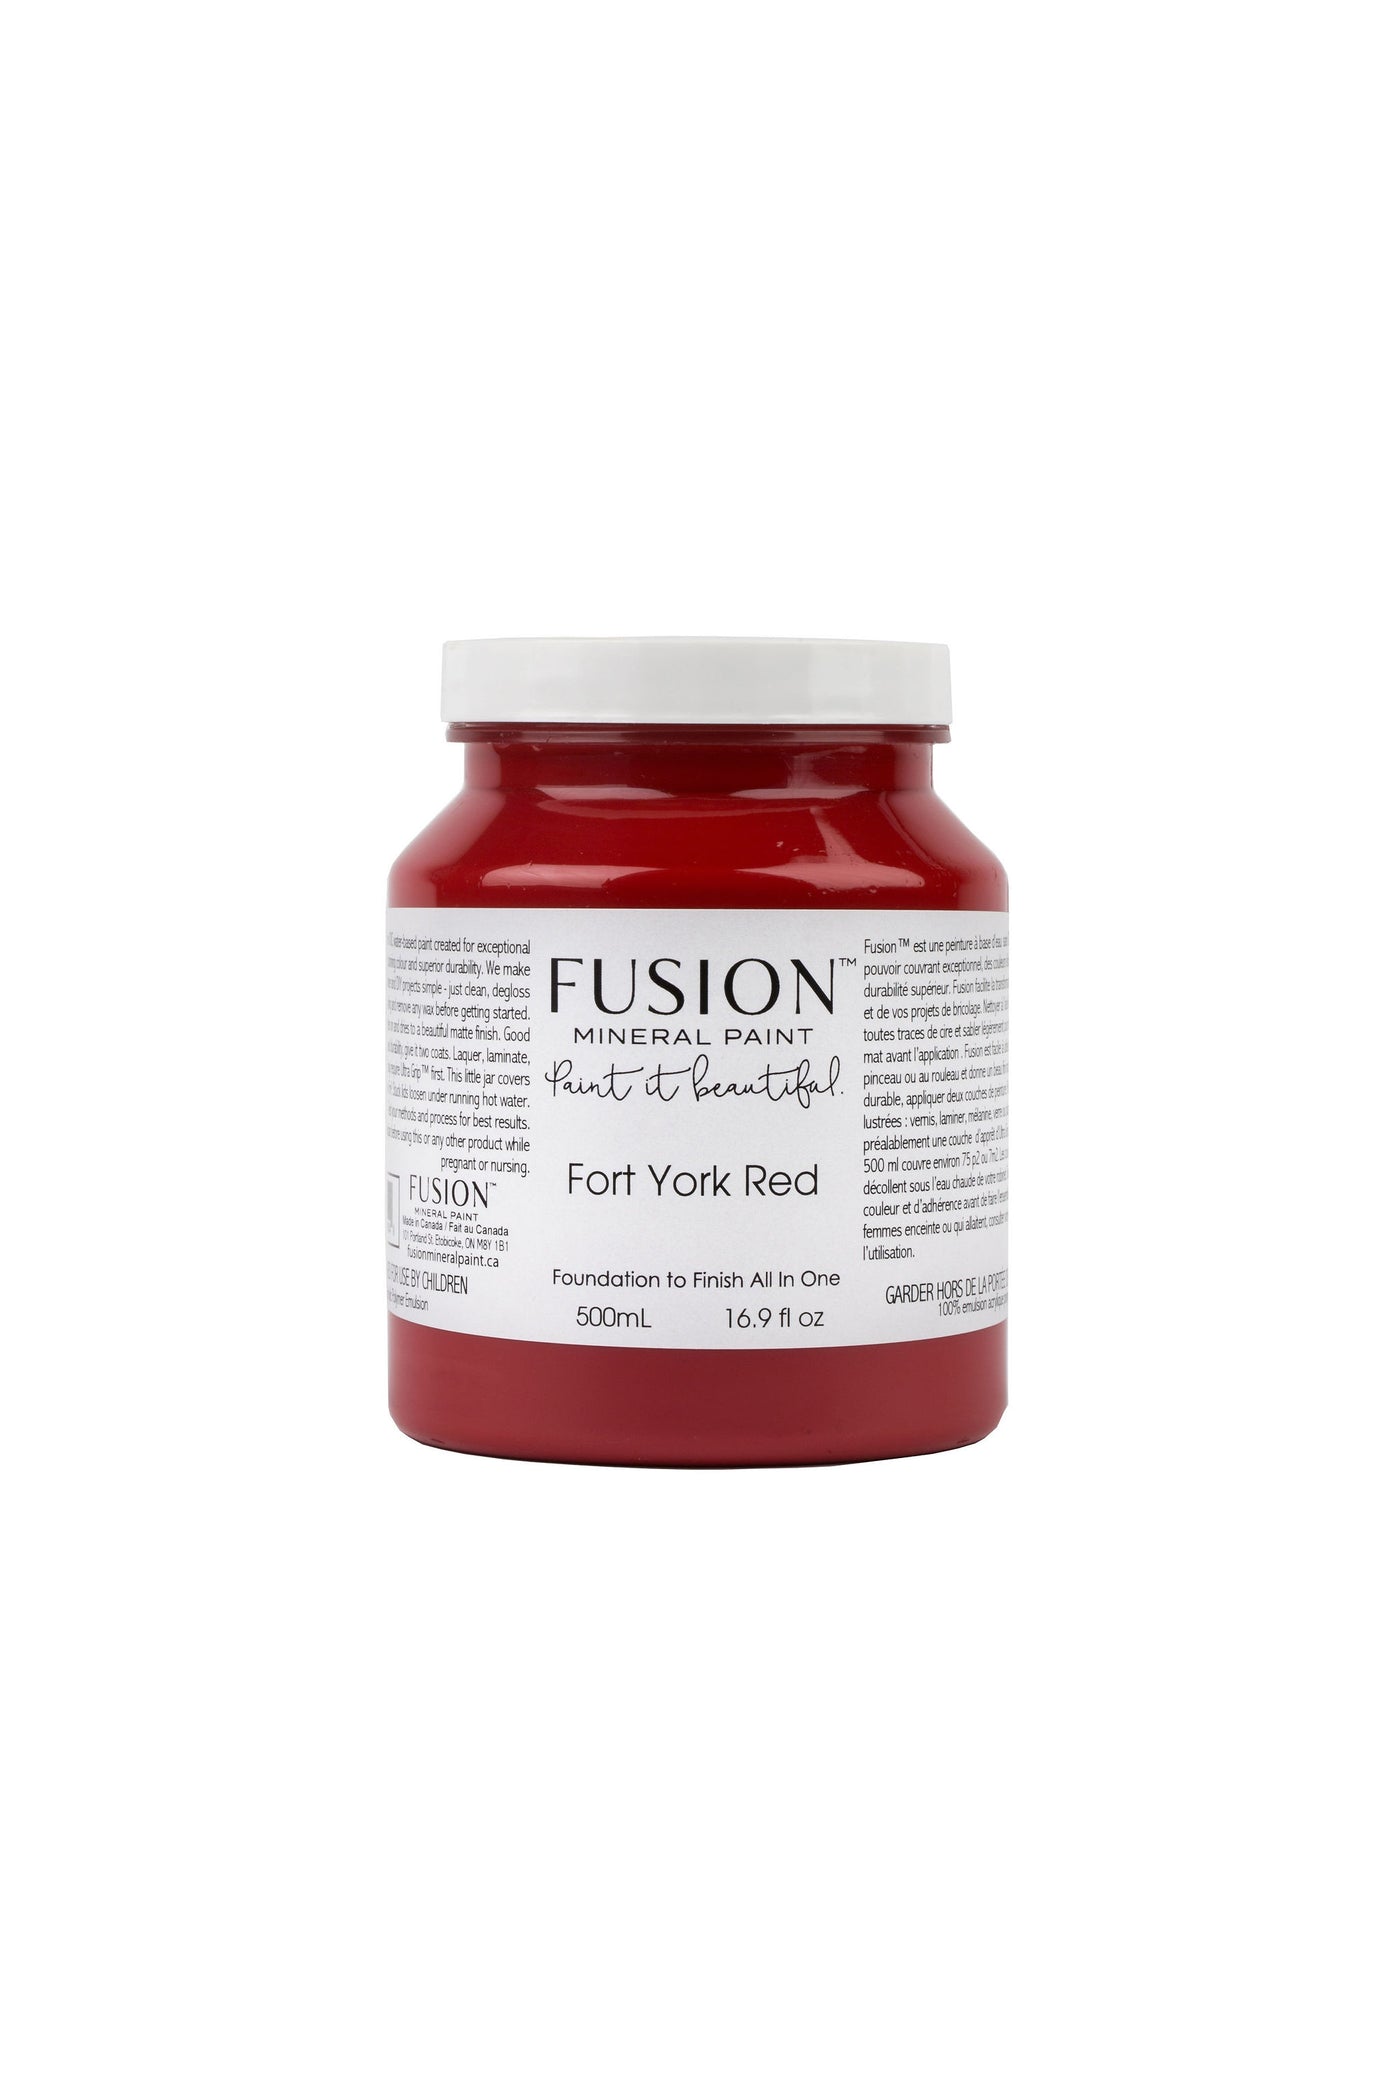 Fort York Red - Fusion Mineral Paint – Gratefully Restored